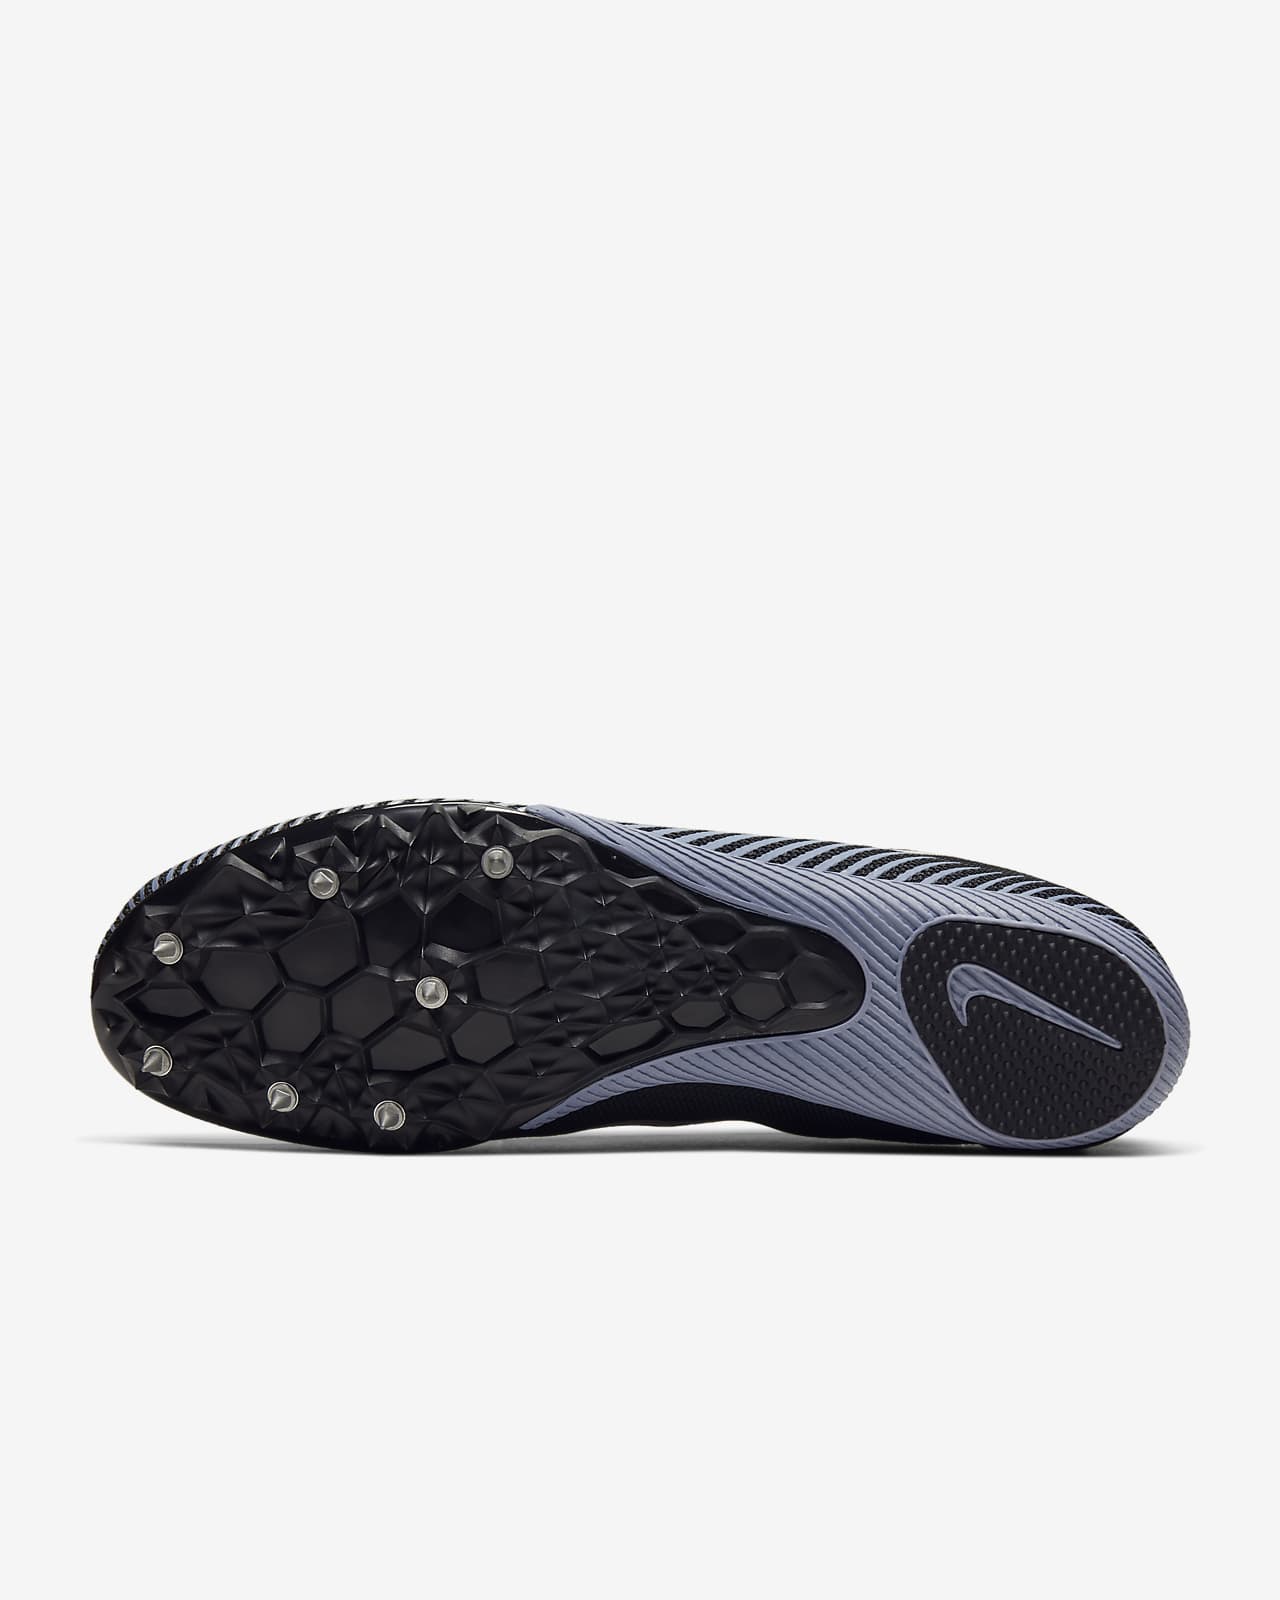 nike zoom rival m9 spikes